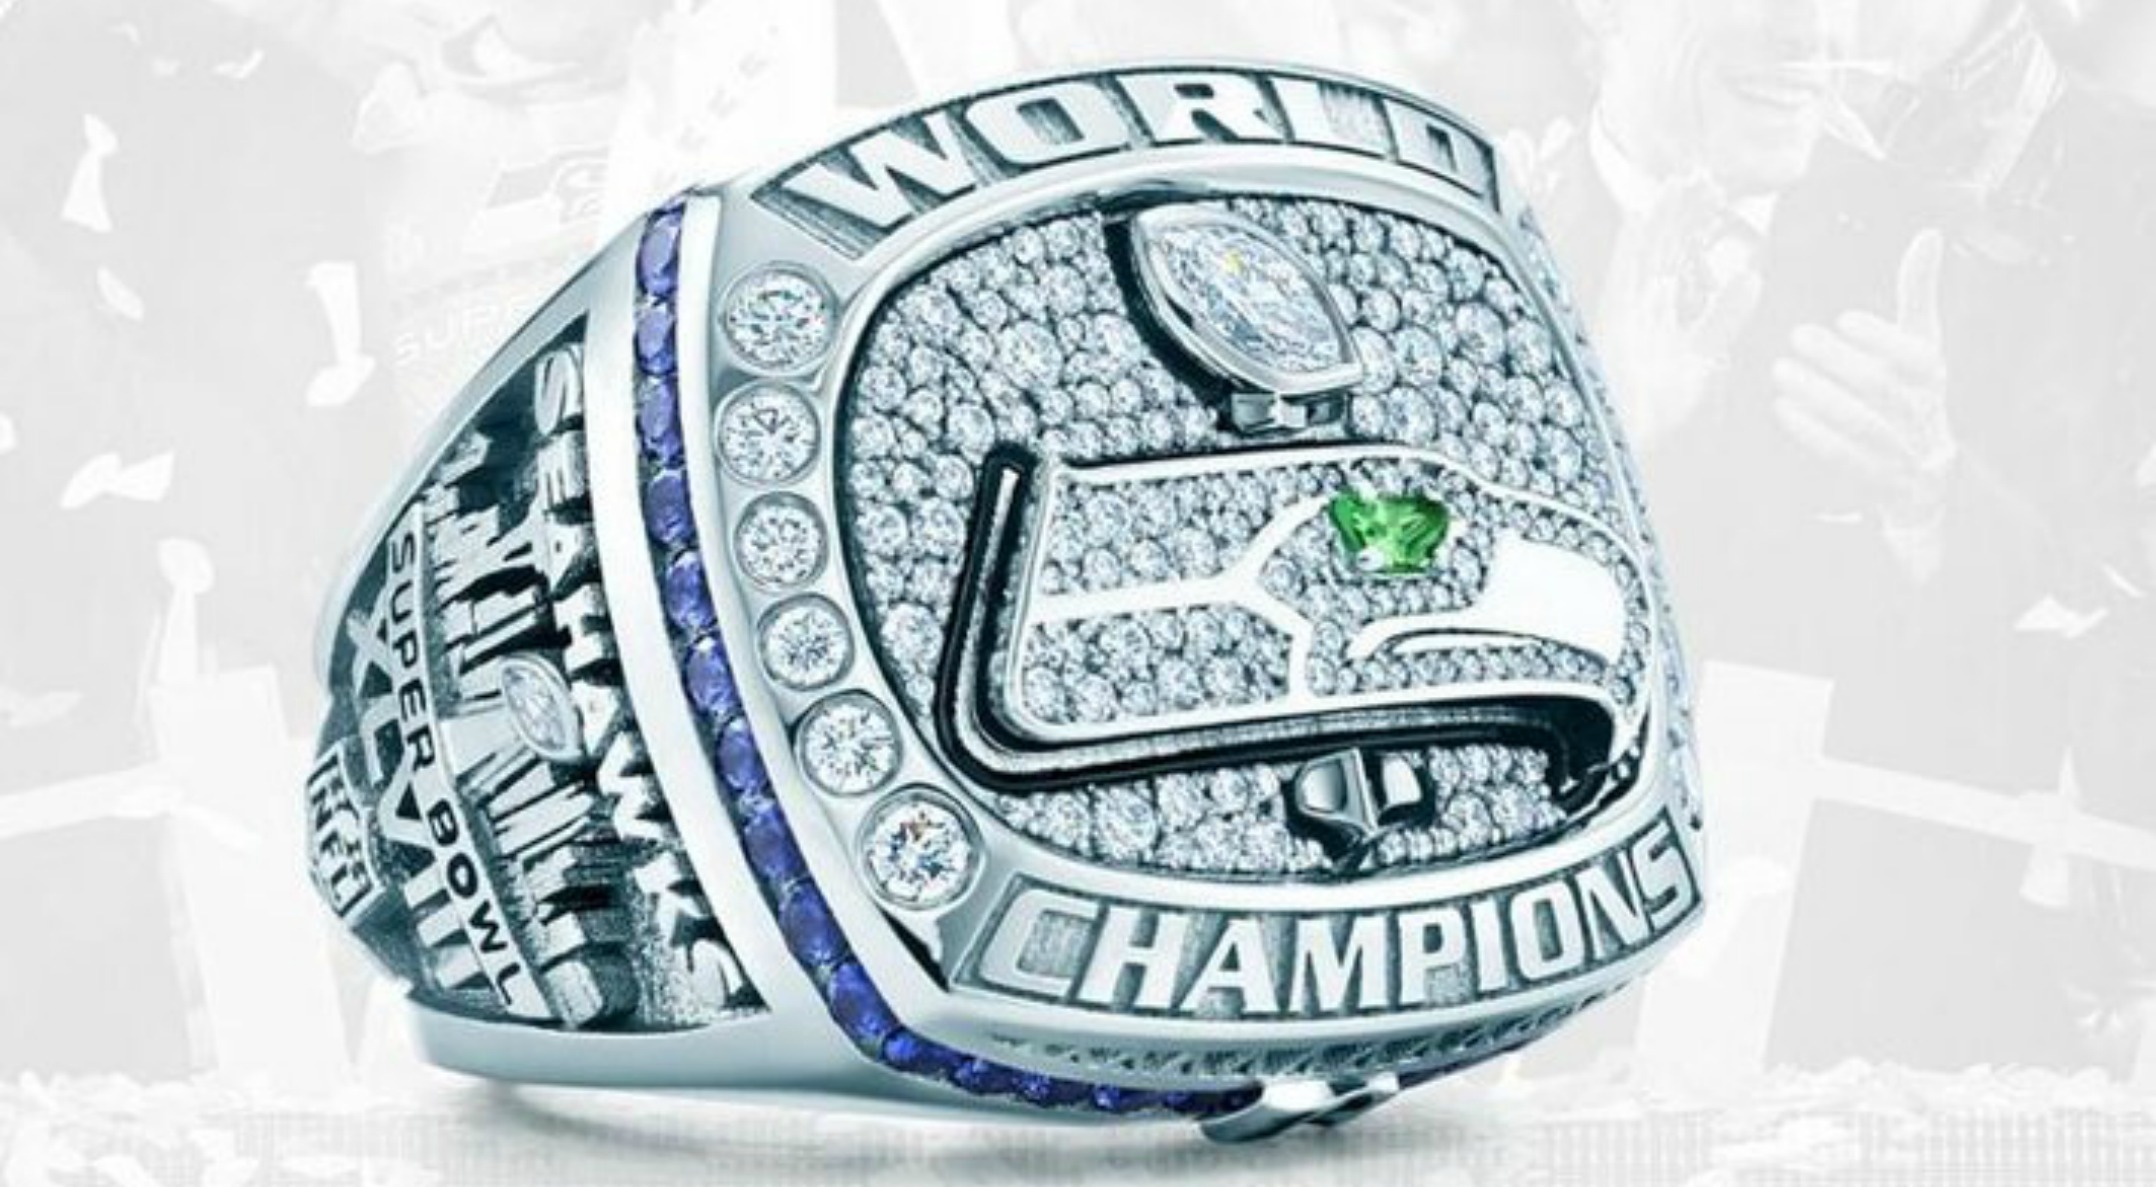 Gallery: Top Super Bowl Rings of All-Time